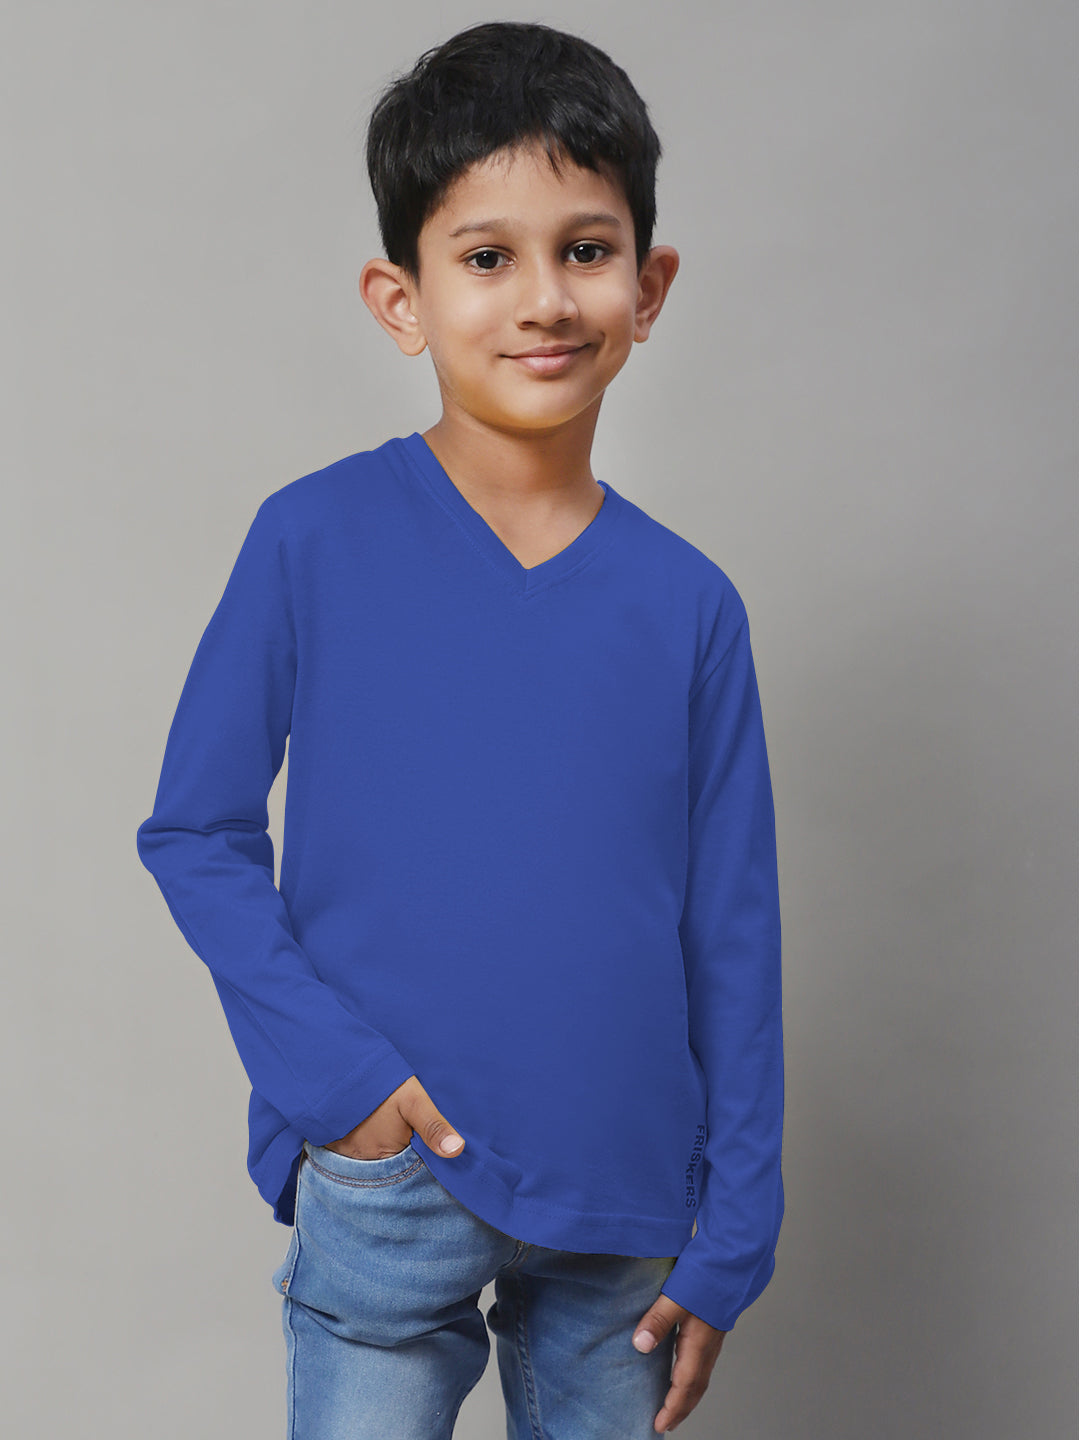 Classic Full Sleeves V-Neck Solid 7-12Y Kids T-Shirt - Friskers